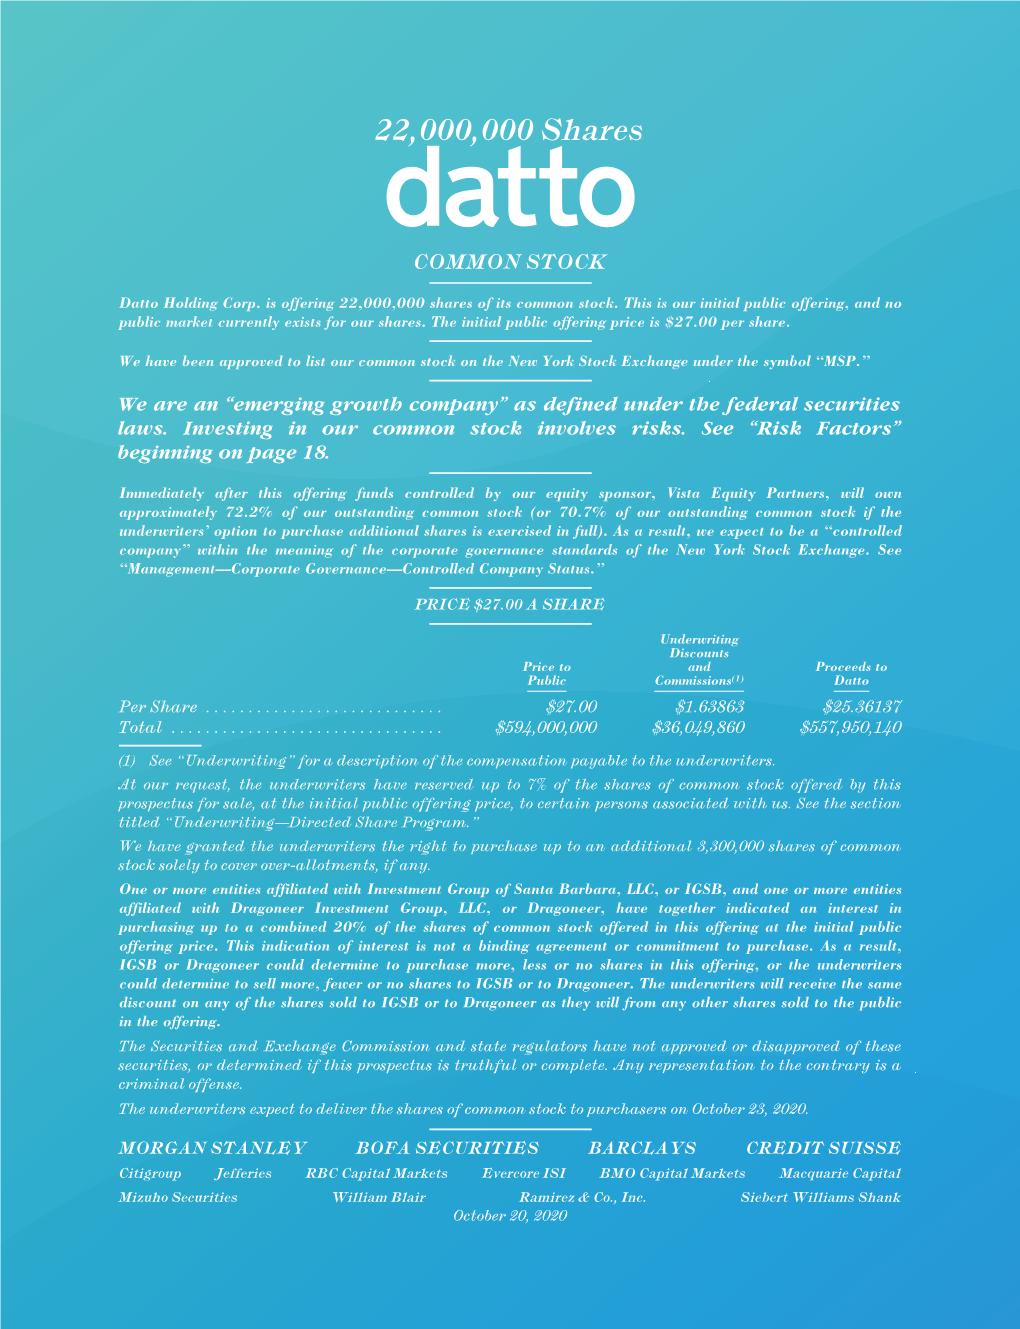 Datto Holding Corp. Is Offering 22,000,000 Shares of Its Common Stock